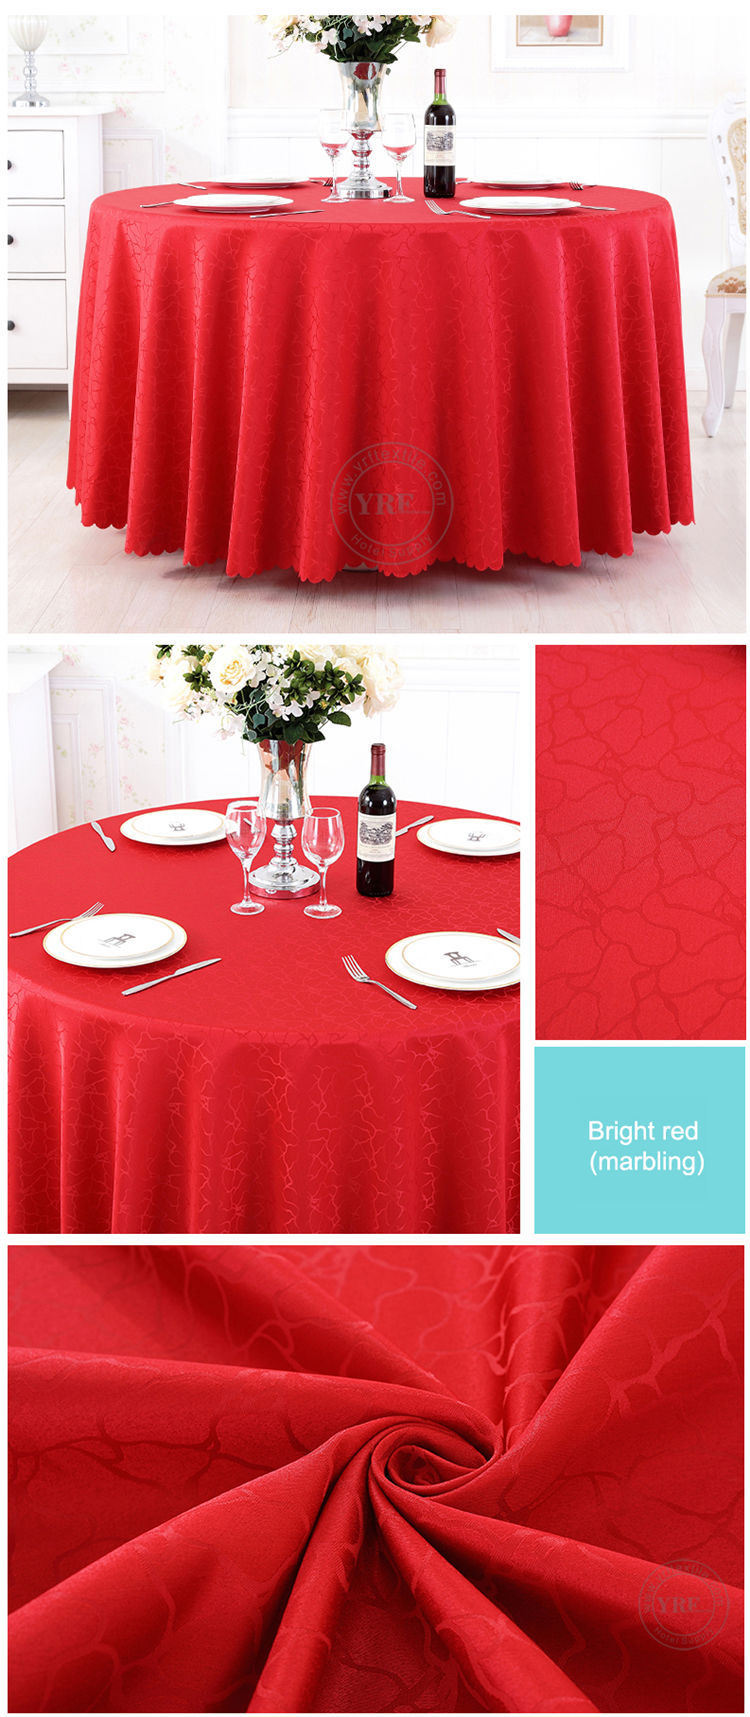 Wholesale Round Embroidered Jacquard Tablecloth